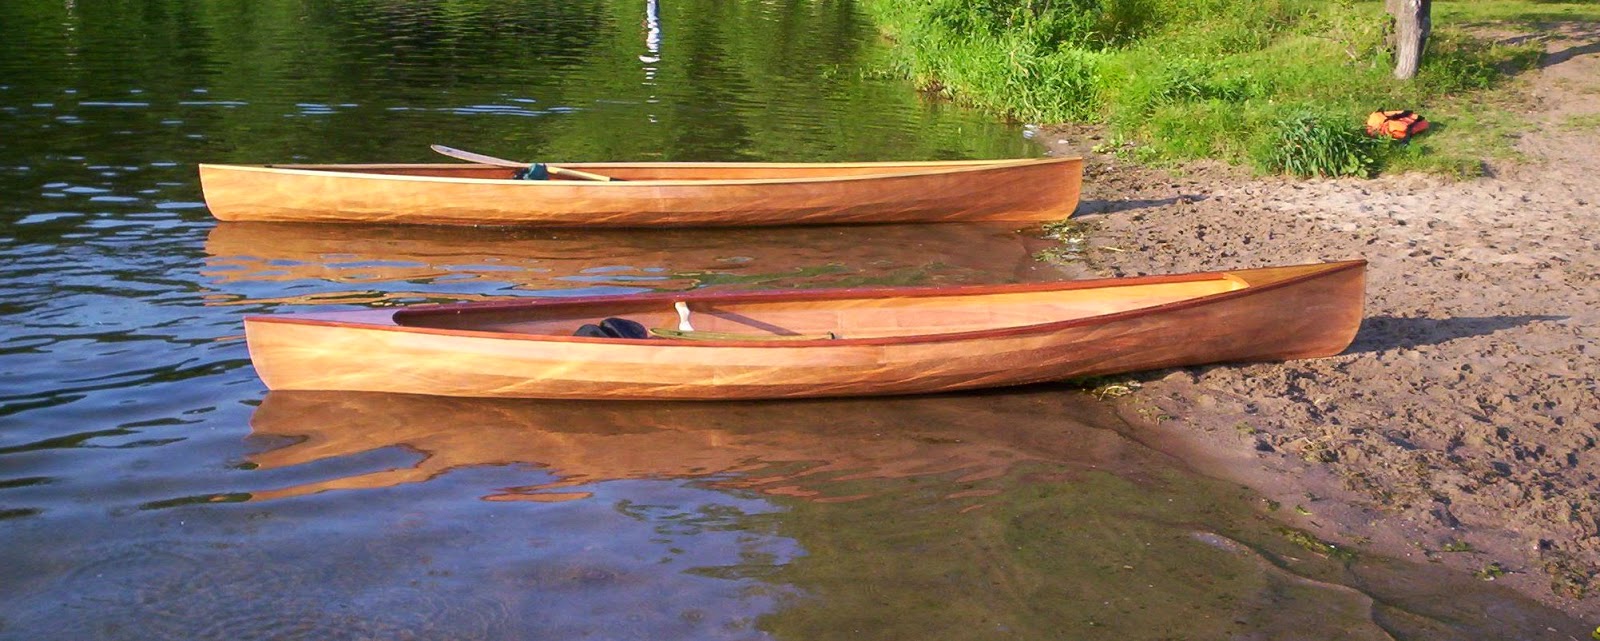 free wooden kayak building plans ~ My Boat Plans